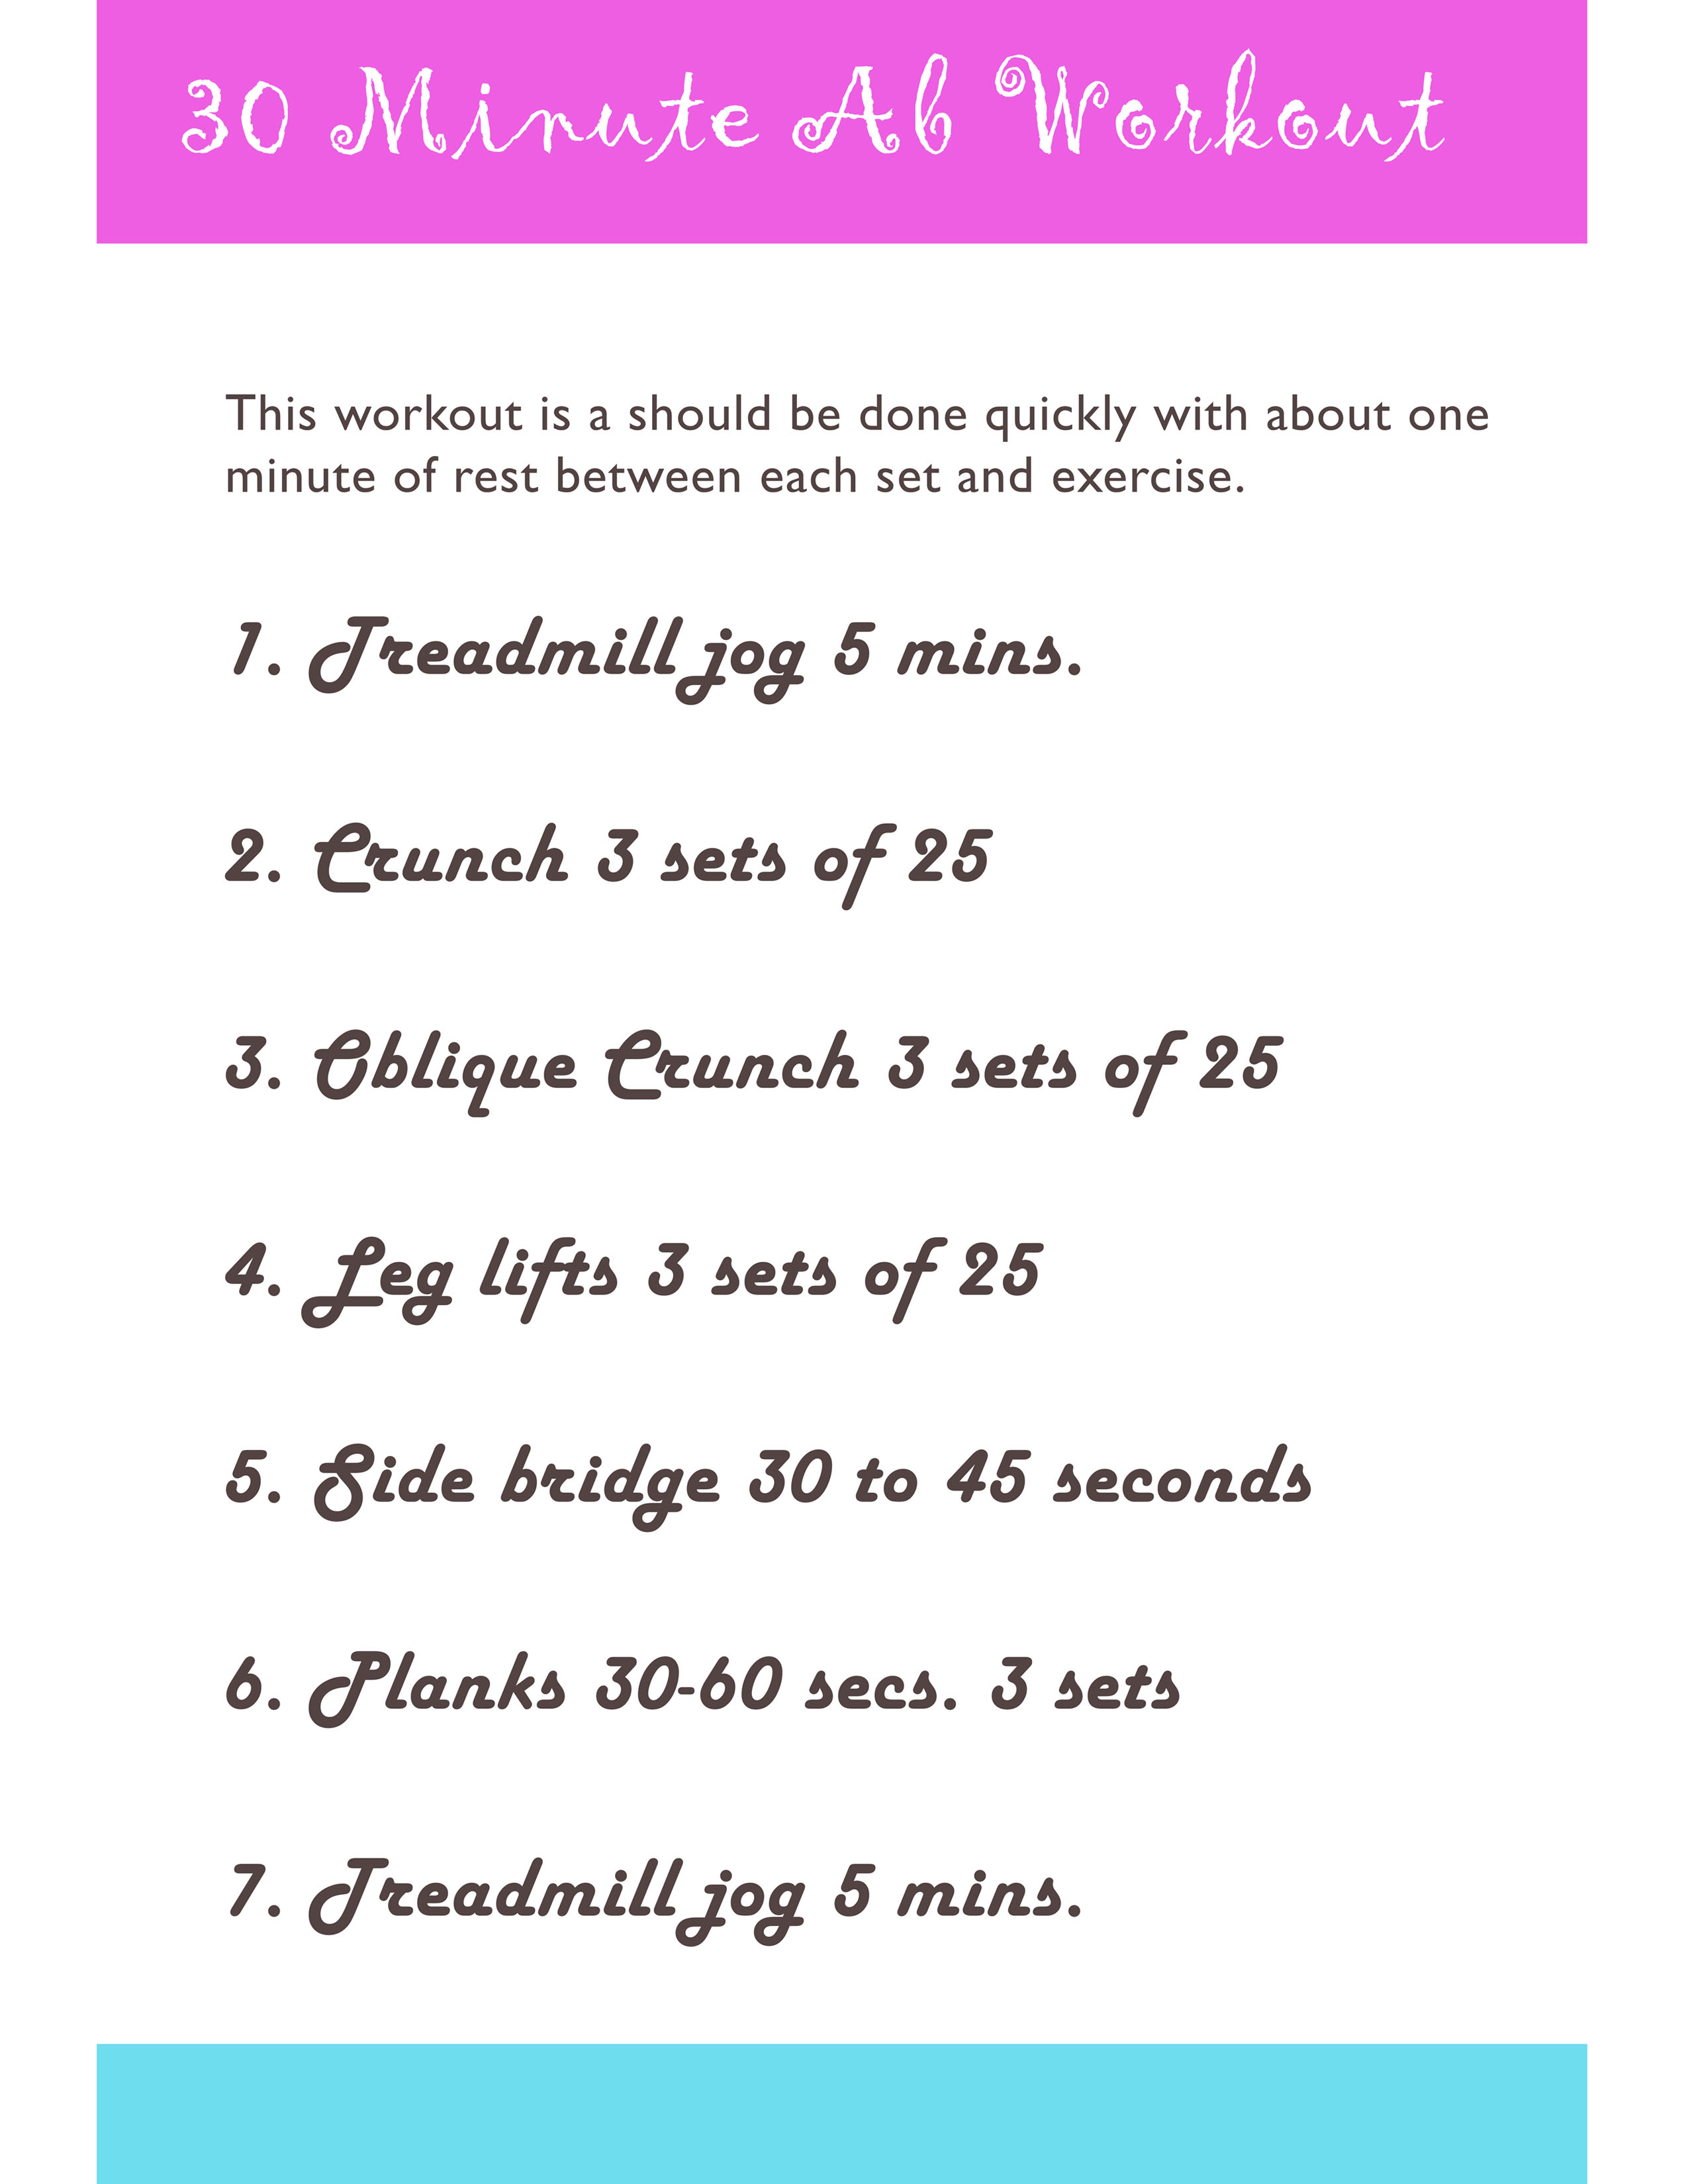 30 minute ab workout you can download and print.